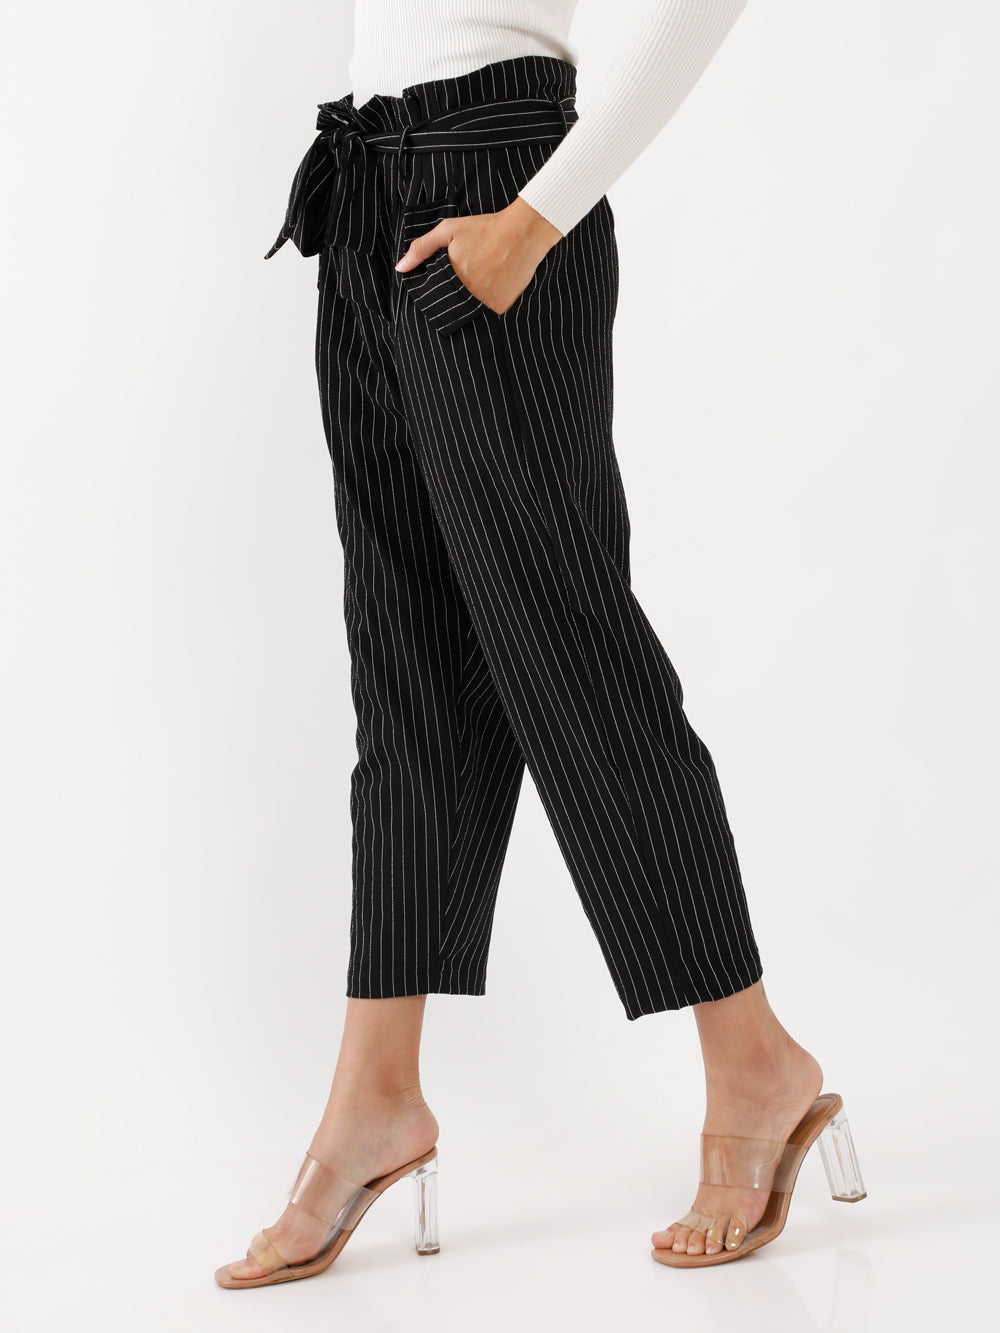 Black Printed Pleated Trouser For Women